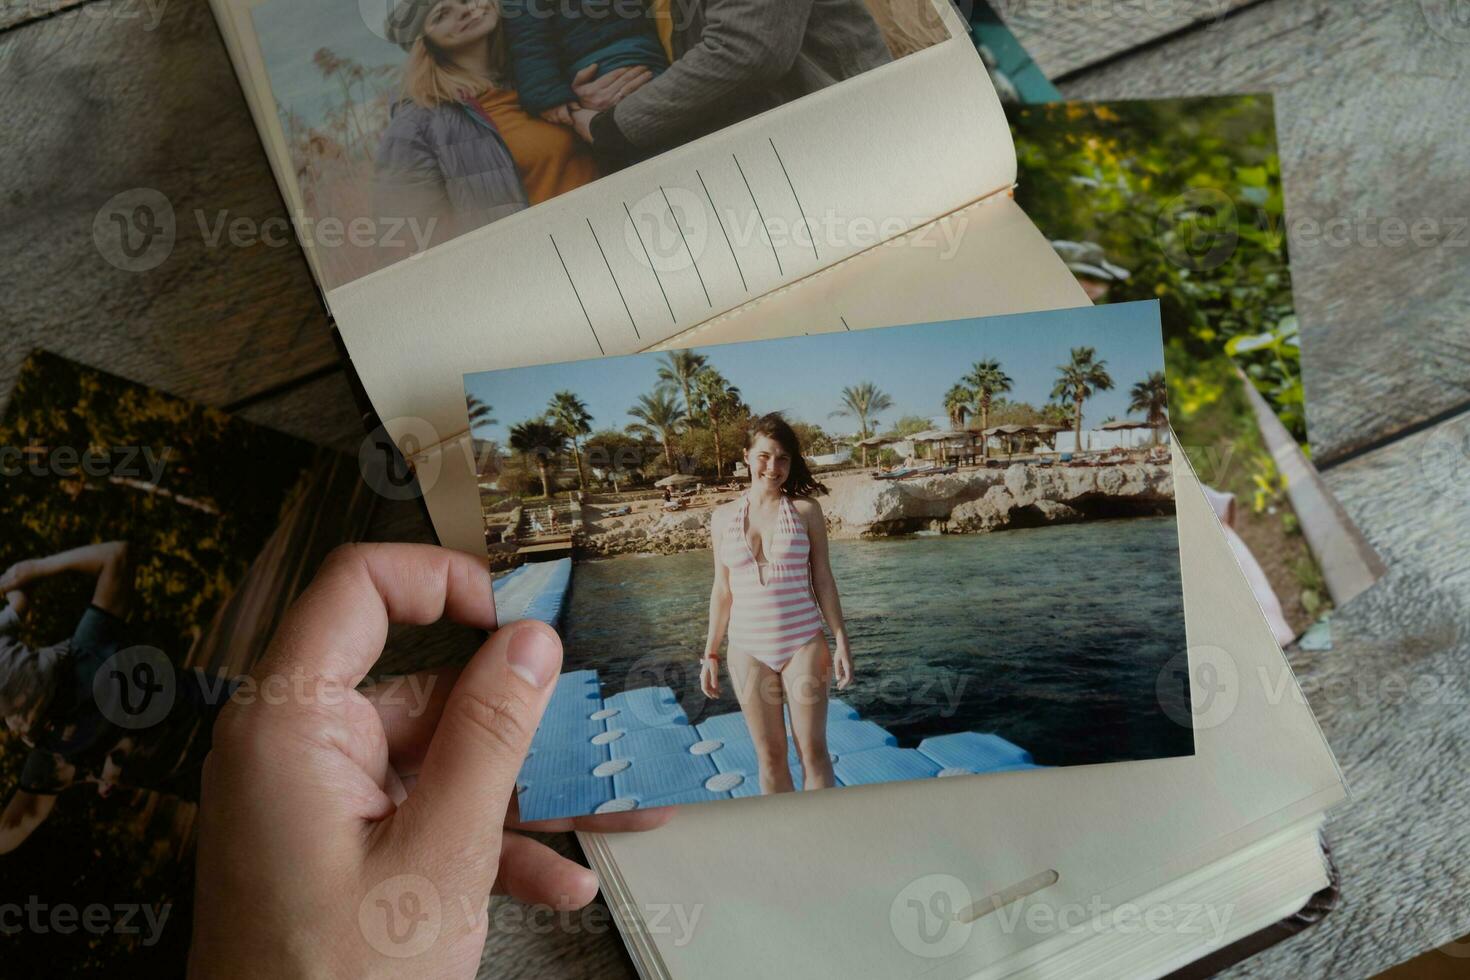 Photo printing concept. Person looks at printed photos in photo album.